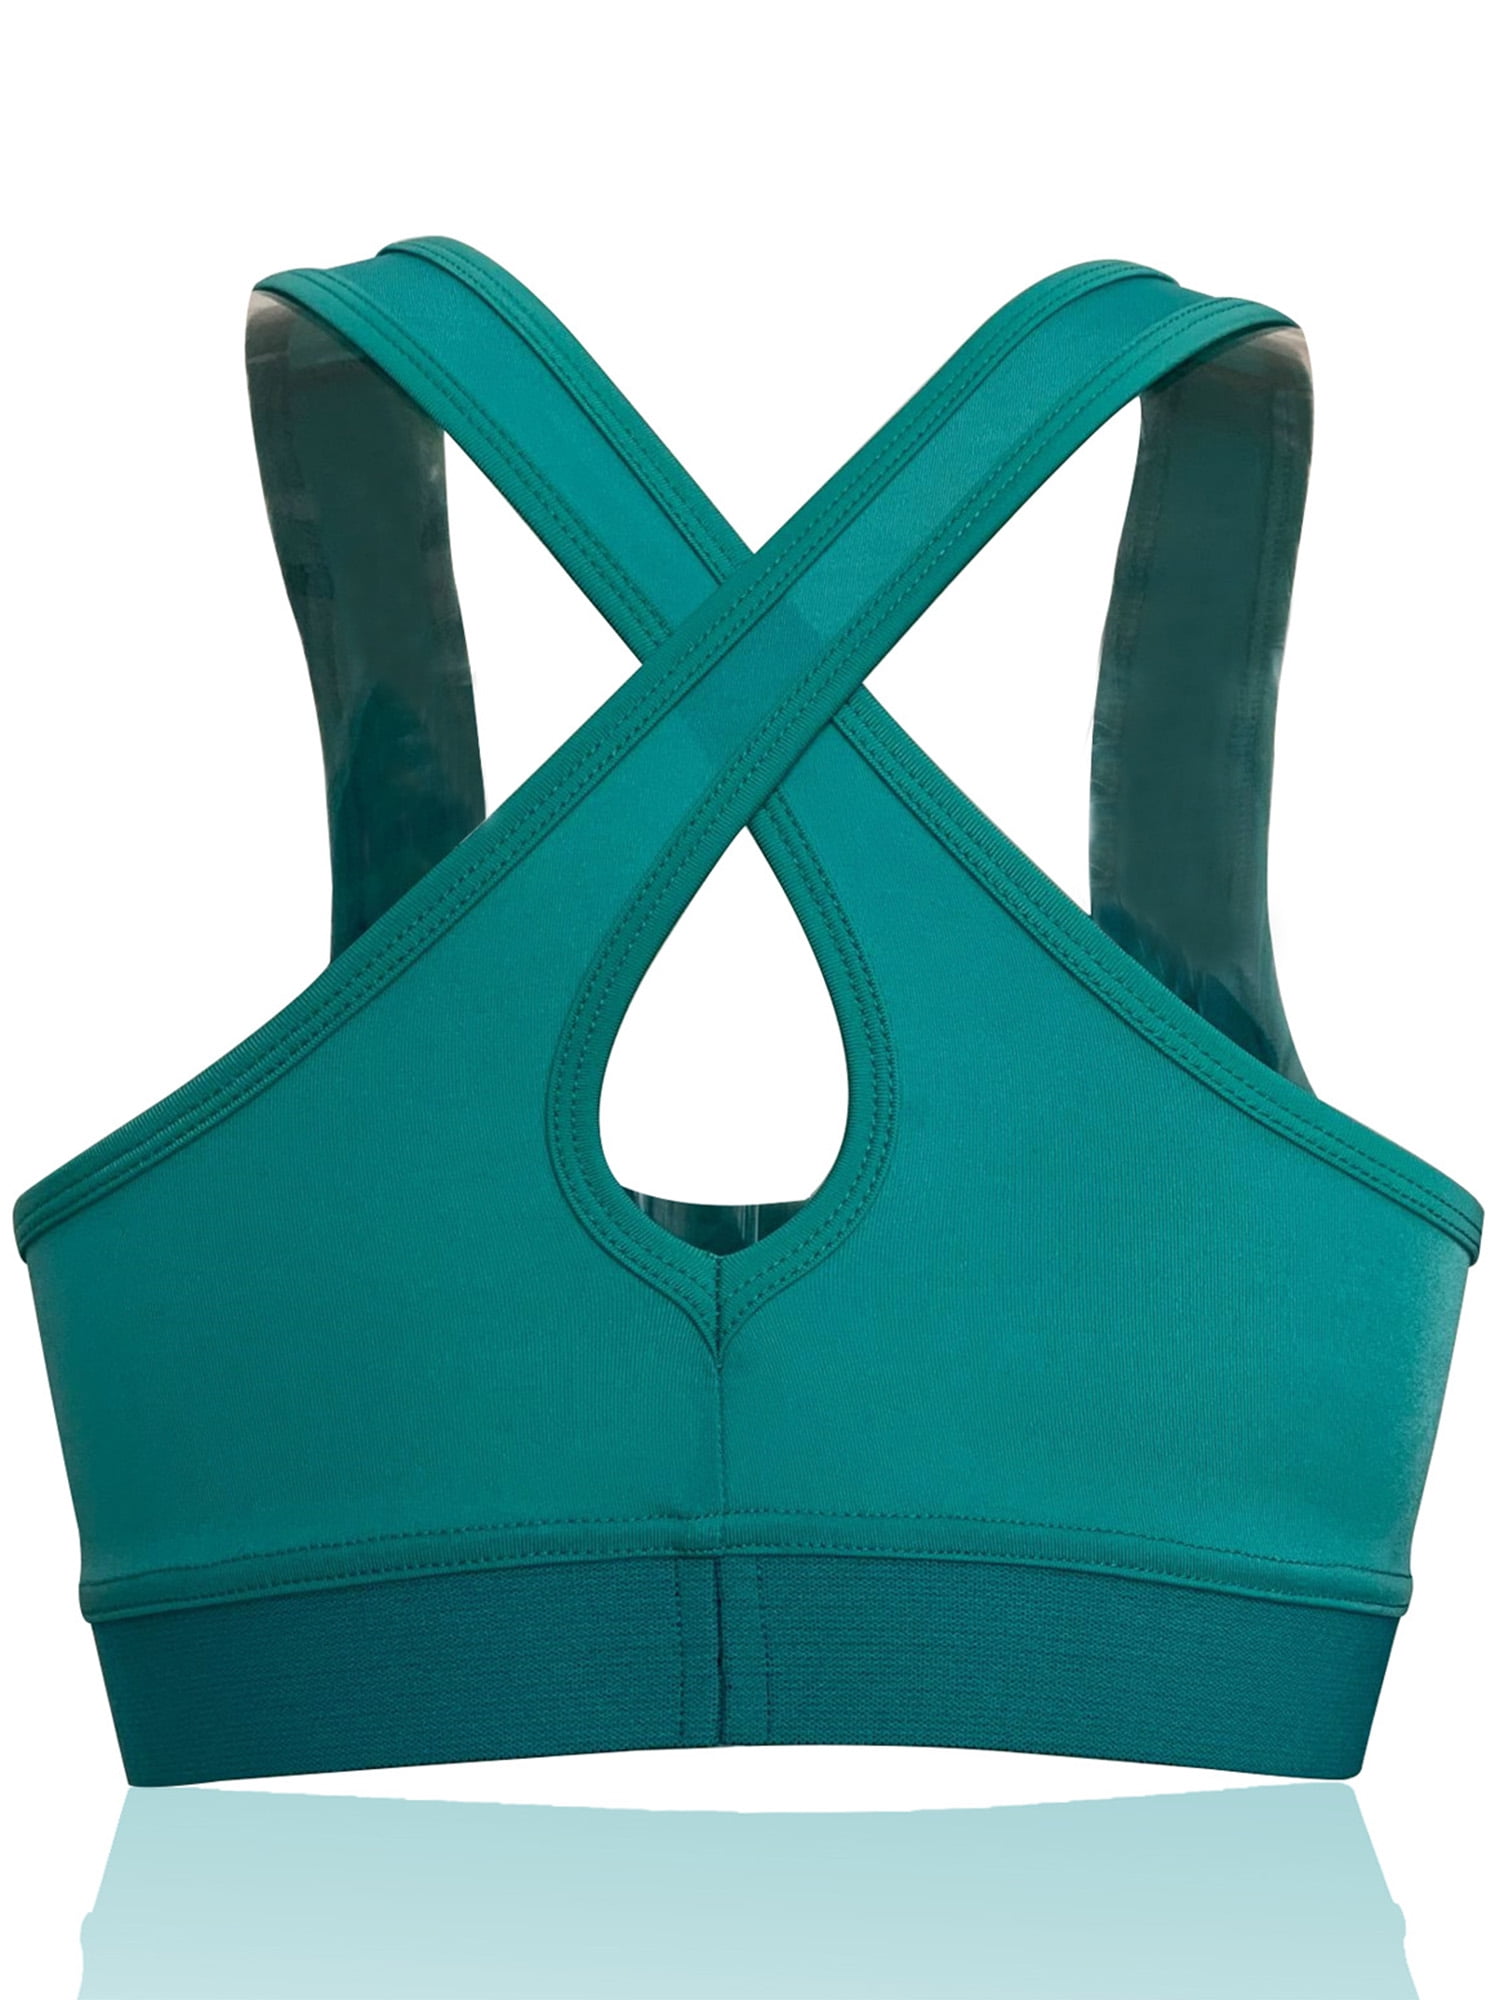 Women High Impact Sports Bra Wirefree Padded Racerback Yoga Tank Tops Comfy Workout Bra For